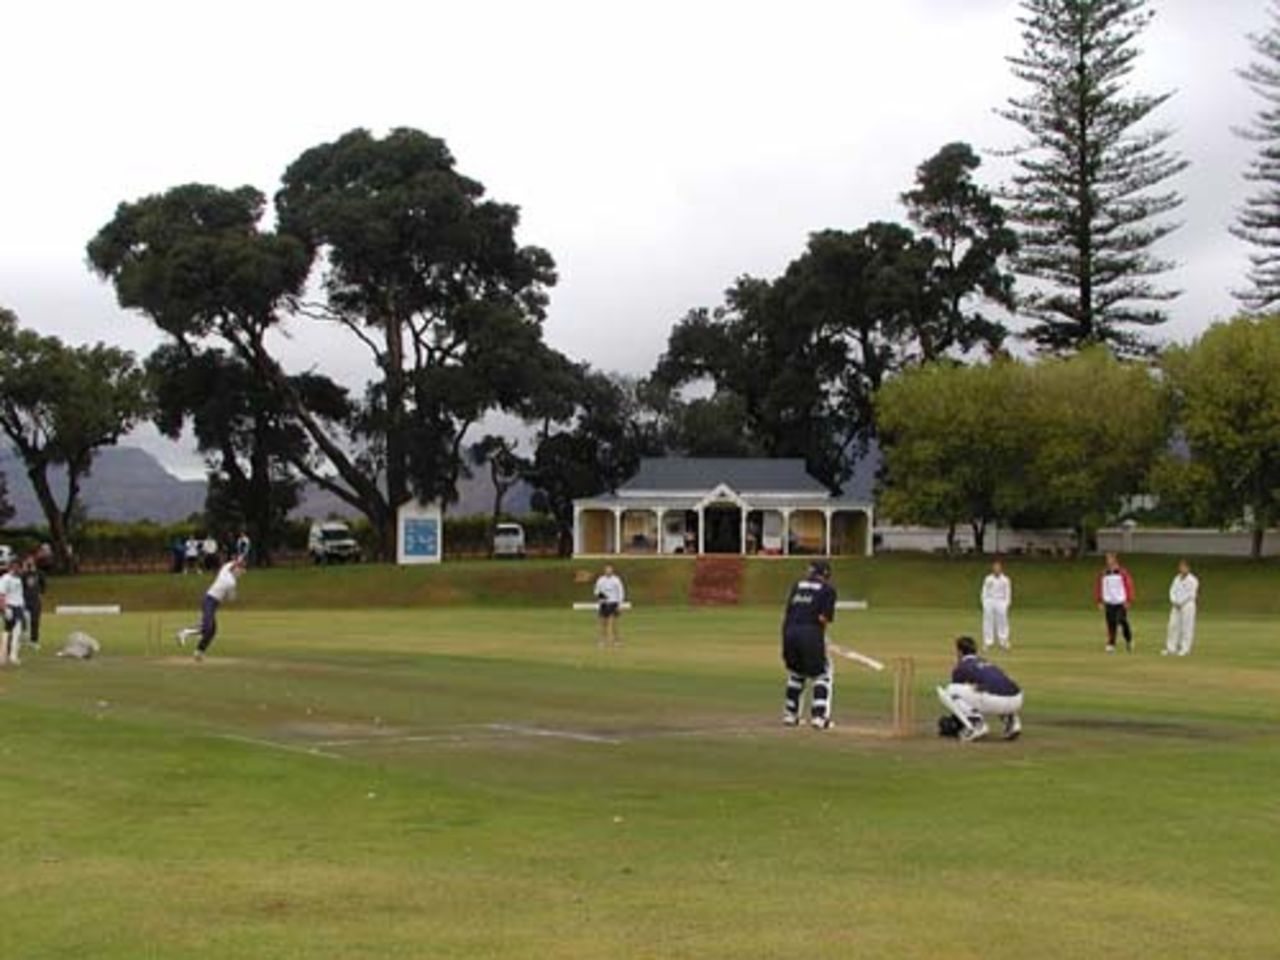 A view looking at the pavilion at the pretty Constantia Uitsig Cricket Club.